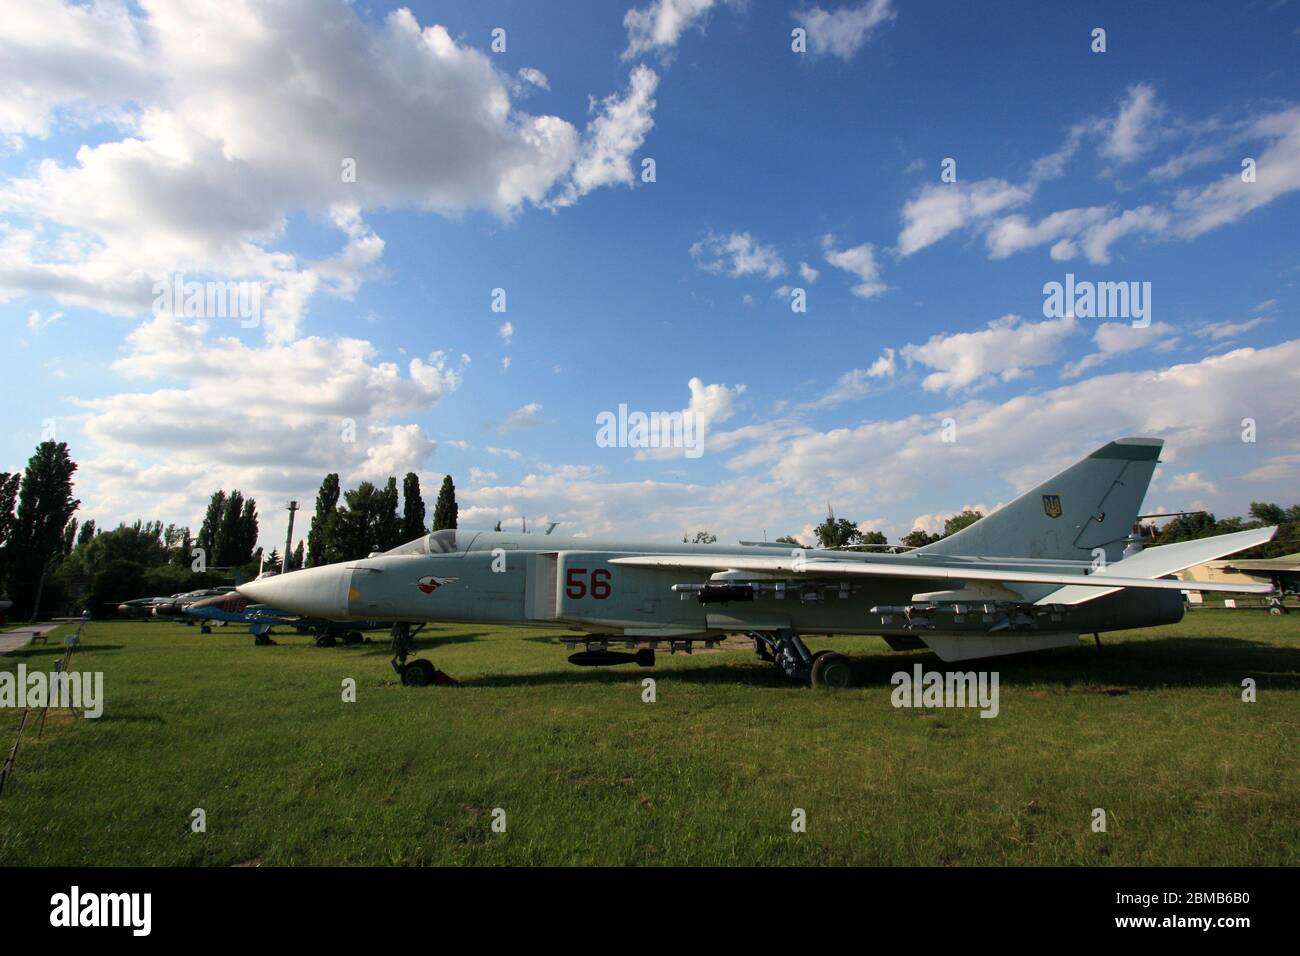 Exterior view of a Sukhoi Su-24 'Fencer' supersonic all-weather attack and bomber aircraft at the Zhulyany State Aviation Museum of Ukraine Stock Photo